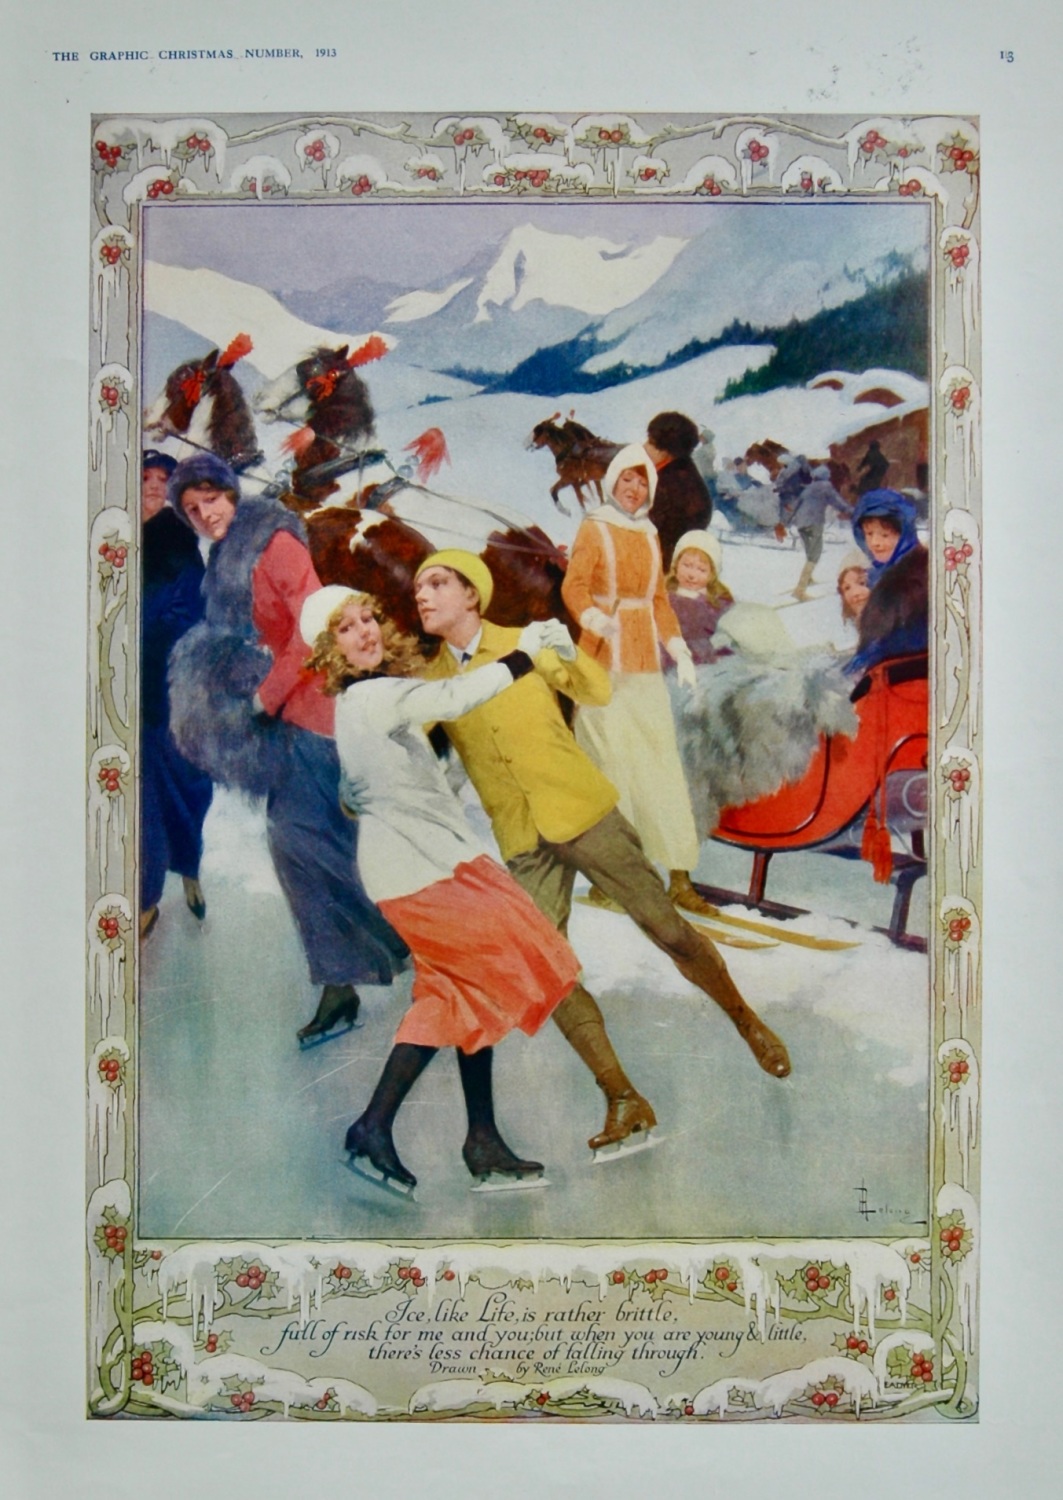 Colour Drawing of couple Ice Skating, by Rene Lelong. 1913.